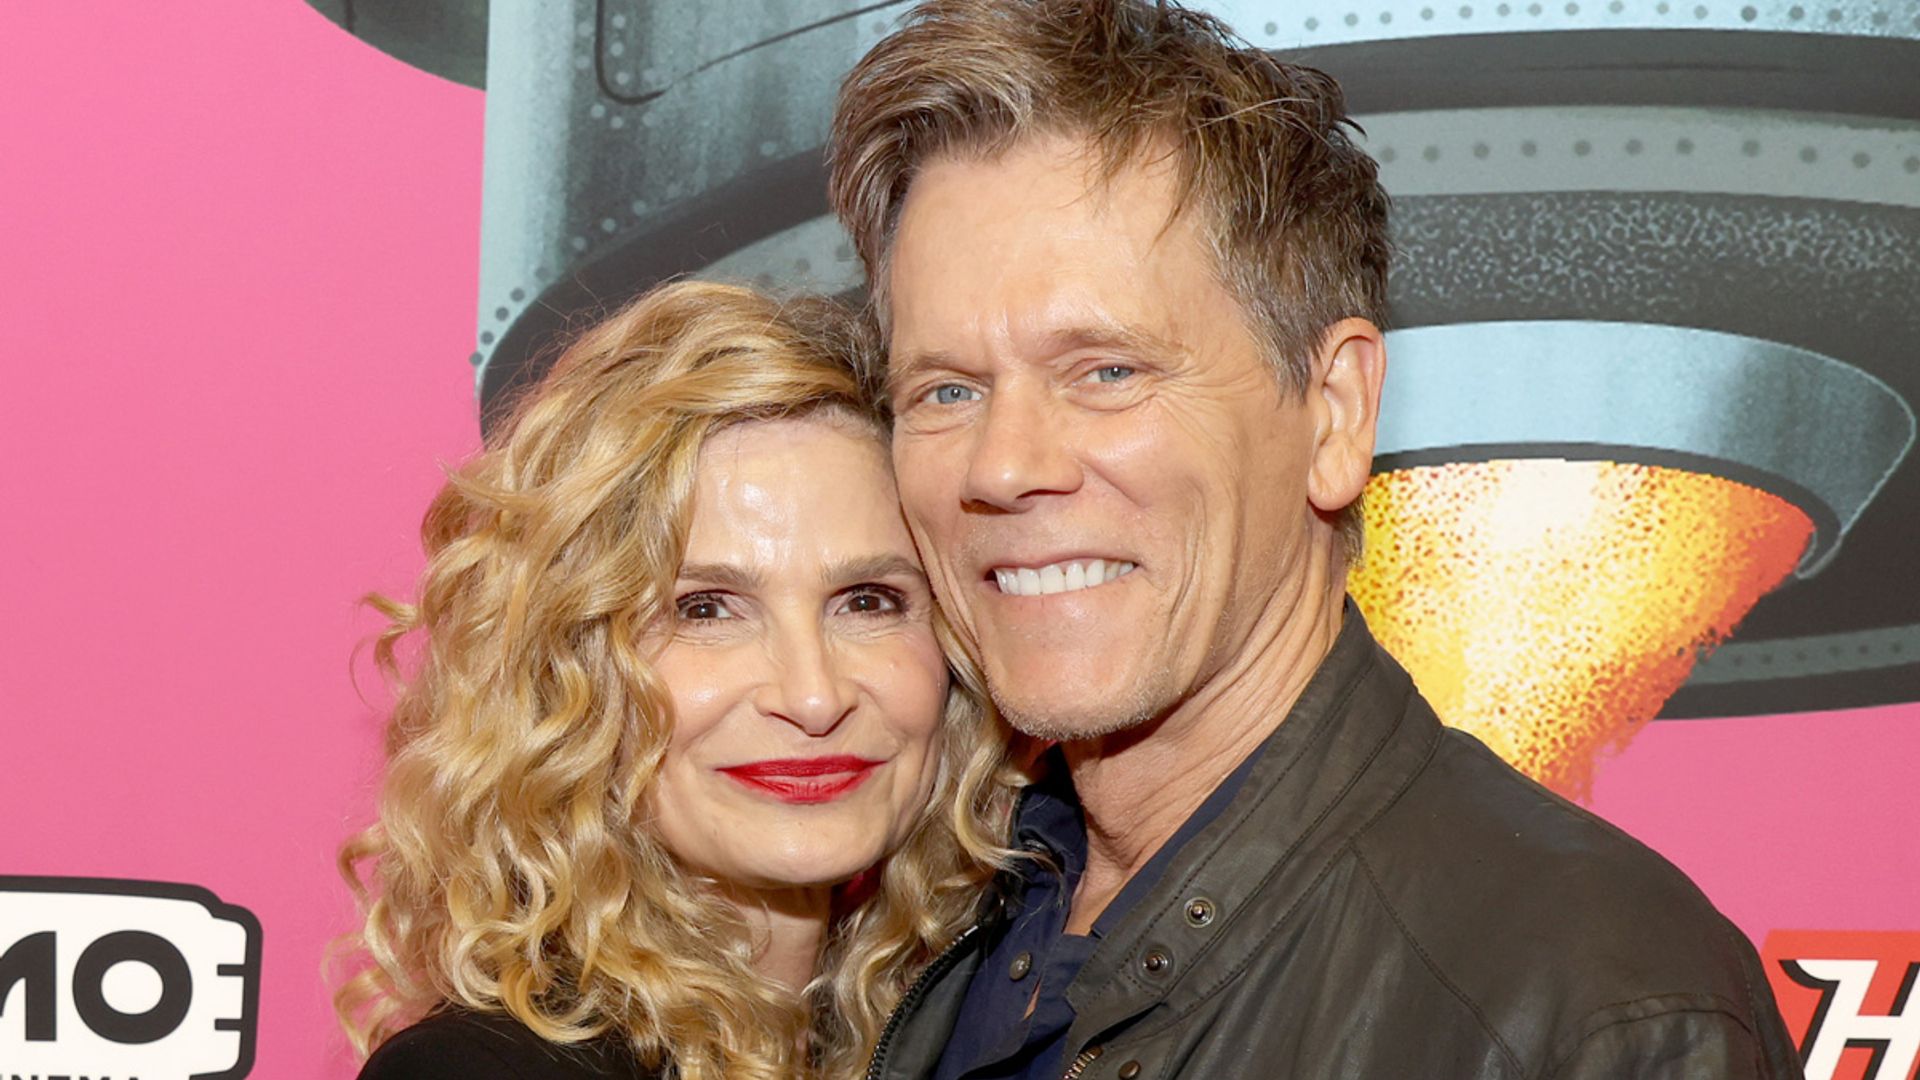 Kyra Sedgwick and Kevin Bacon's quirky farmhouse has the most unexpected décor